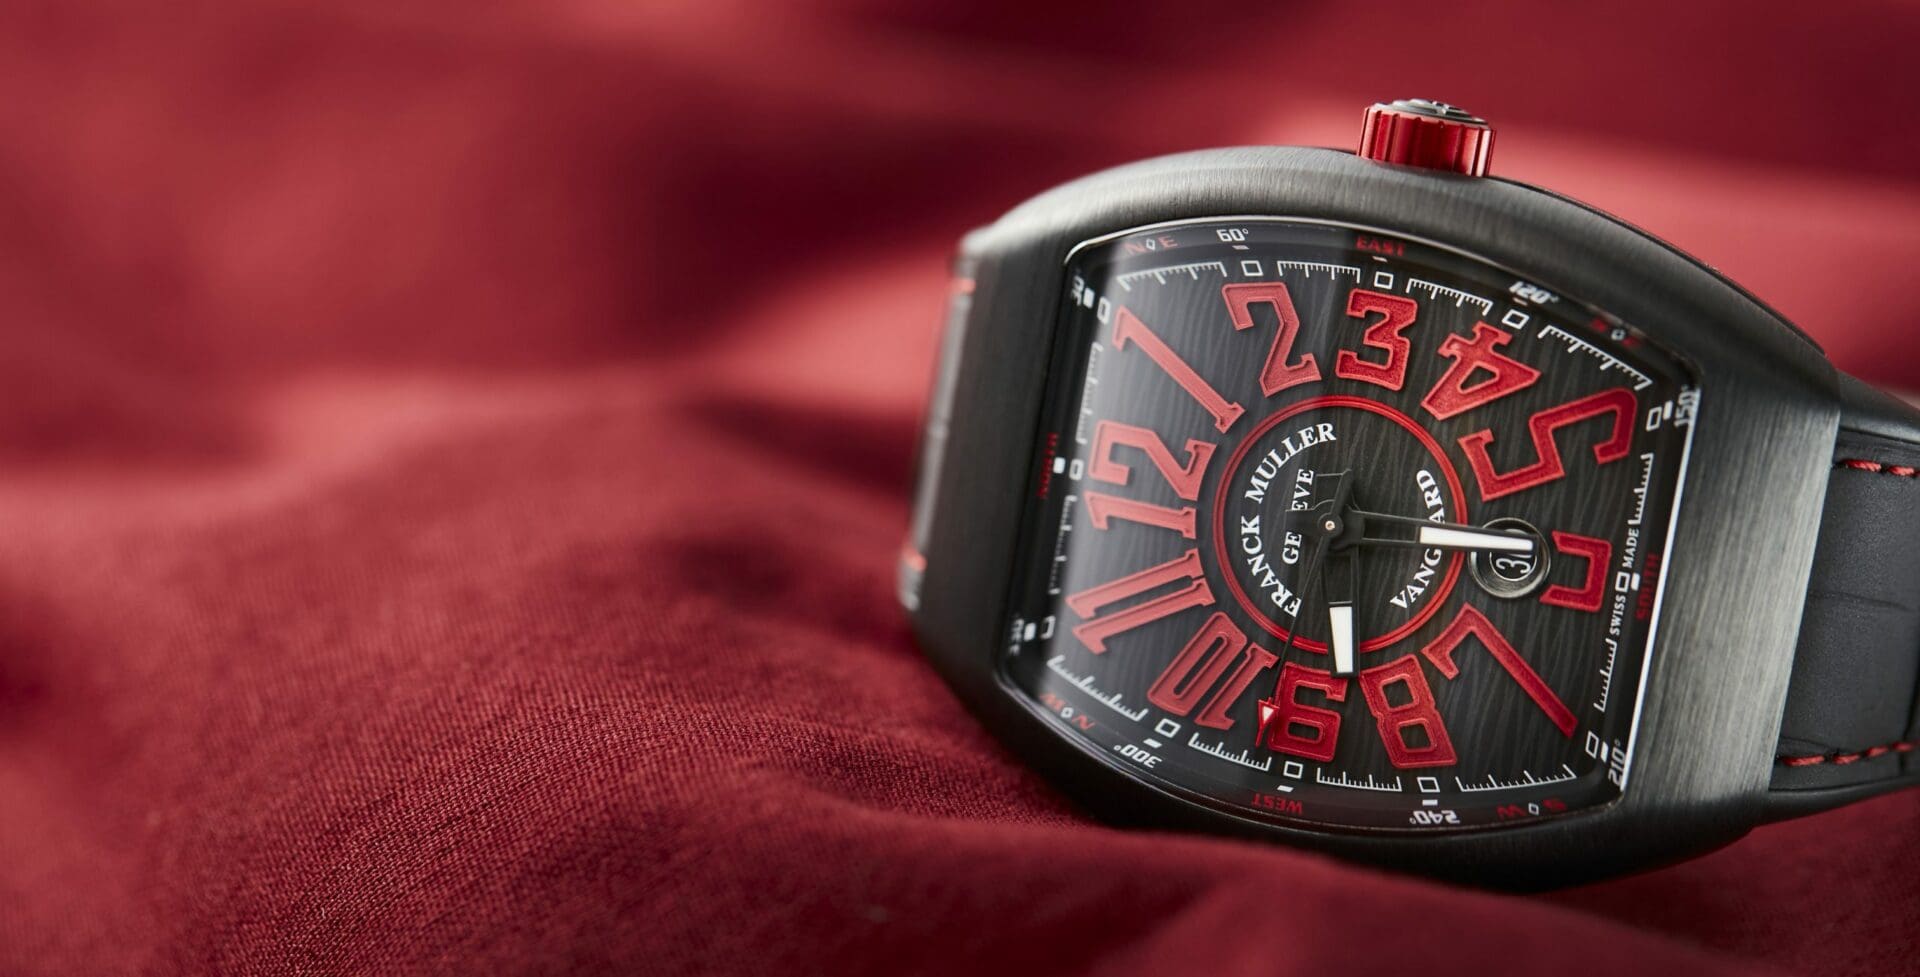 INTRODUCING: The Franck Muller Vanguard Classic that can take you from boardroom to beach